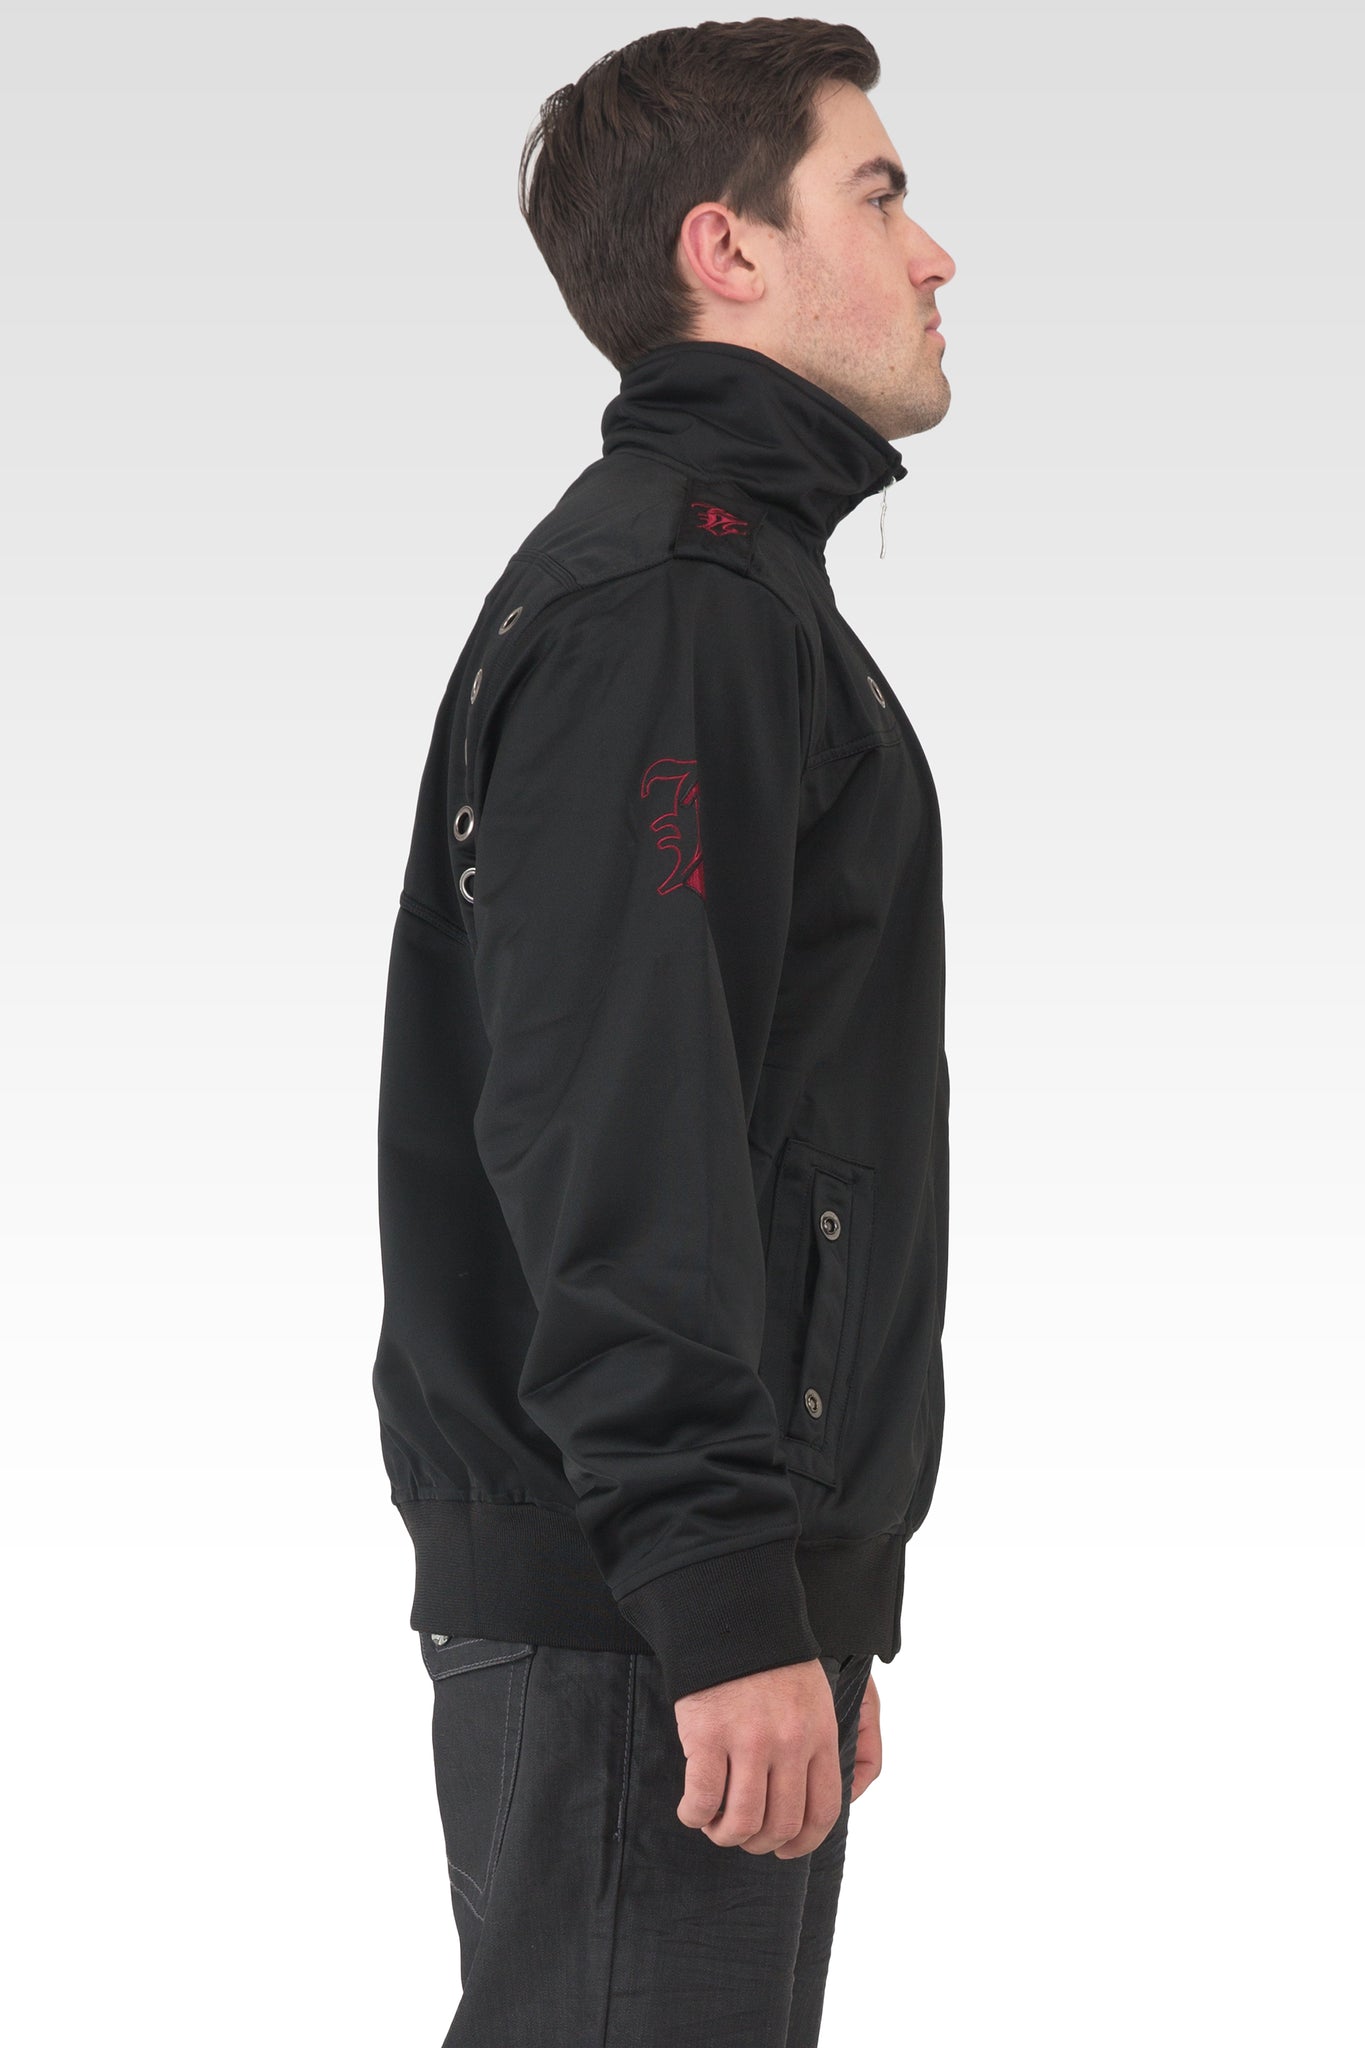 Men's Black Poly Performance Full Zip Track Jacket With Burgundy Embroidery Patches & Epaulets